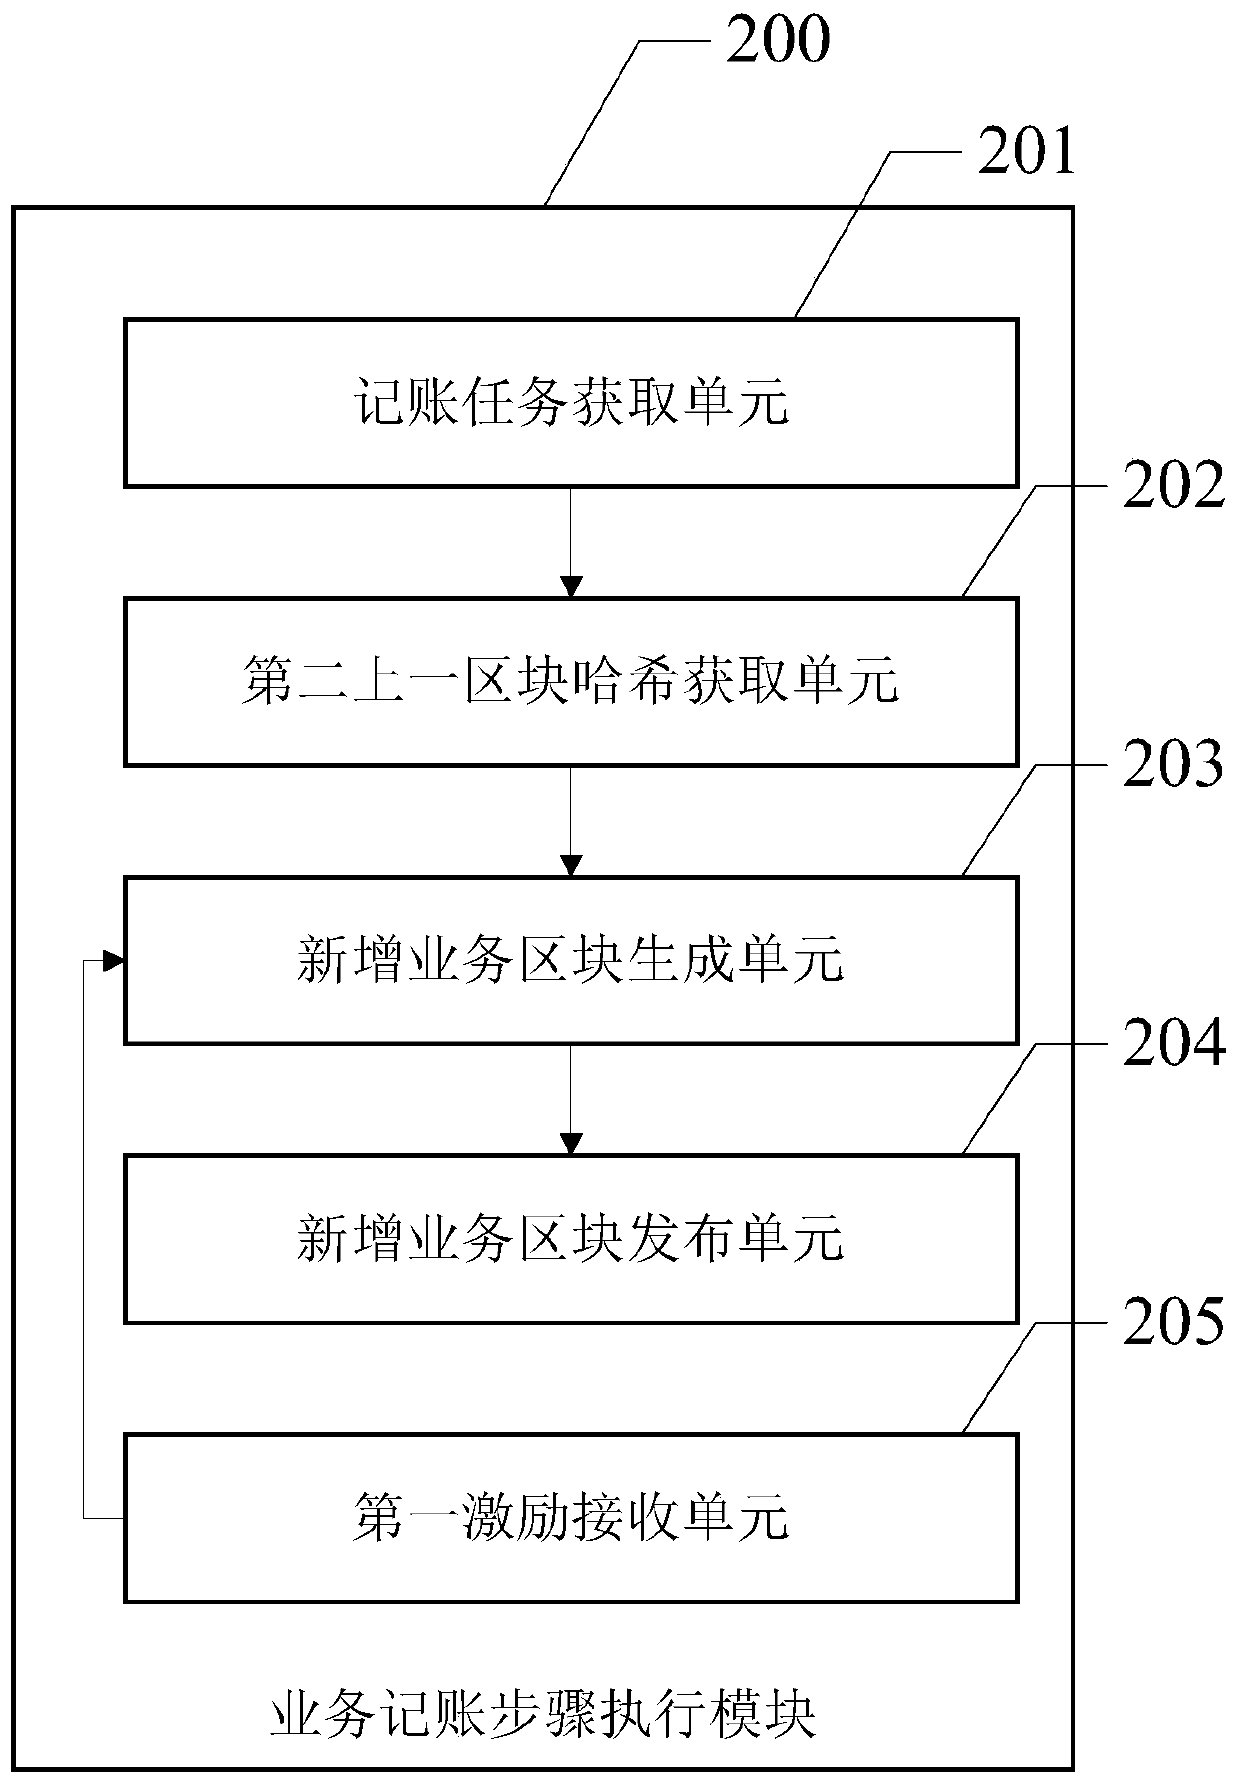 An account book accounting method of a block chain network with parallel chains periodically converged